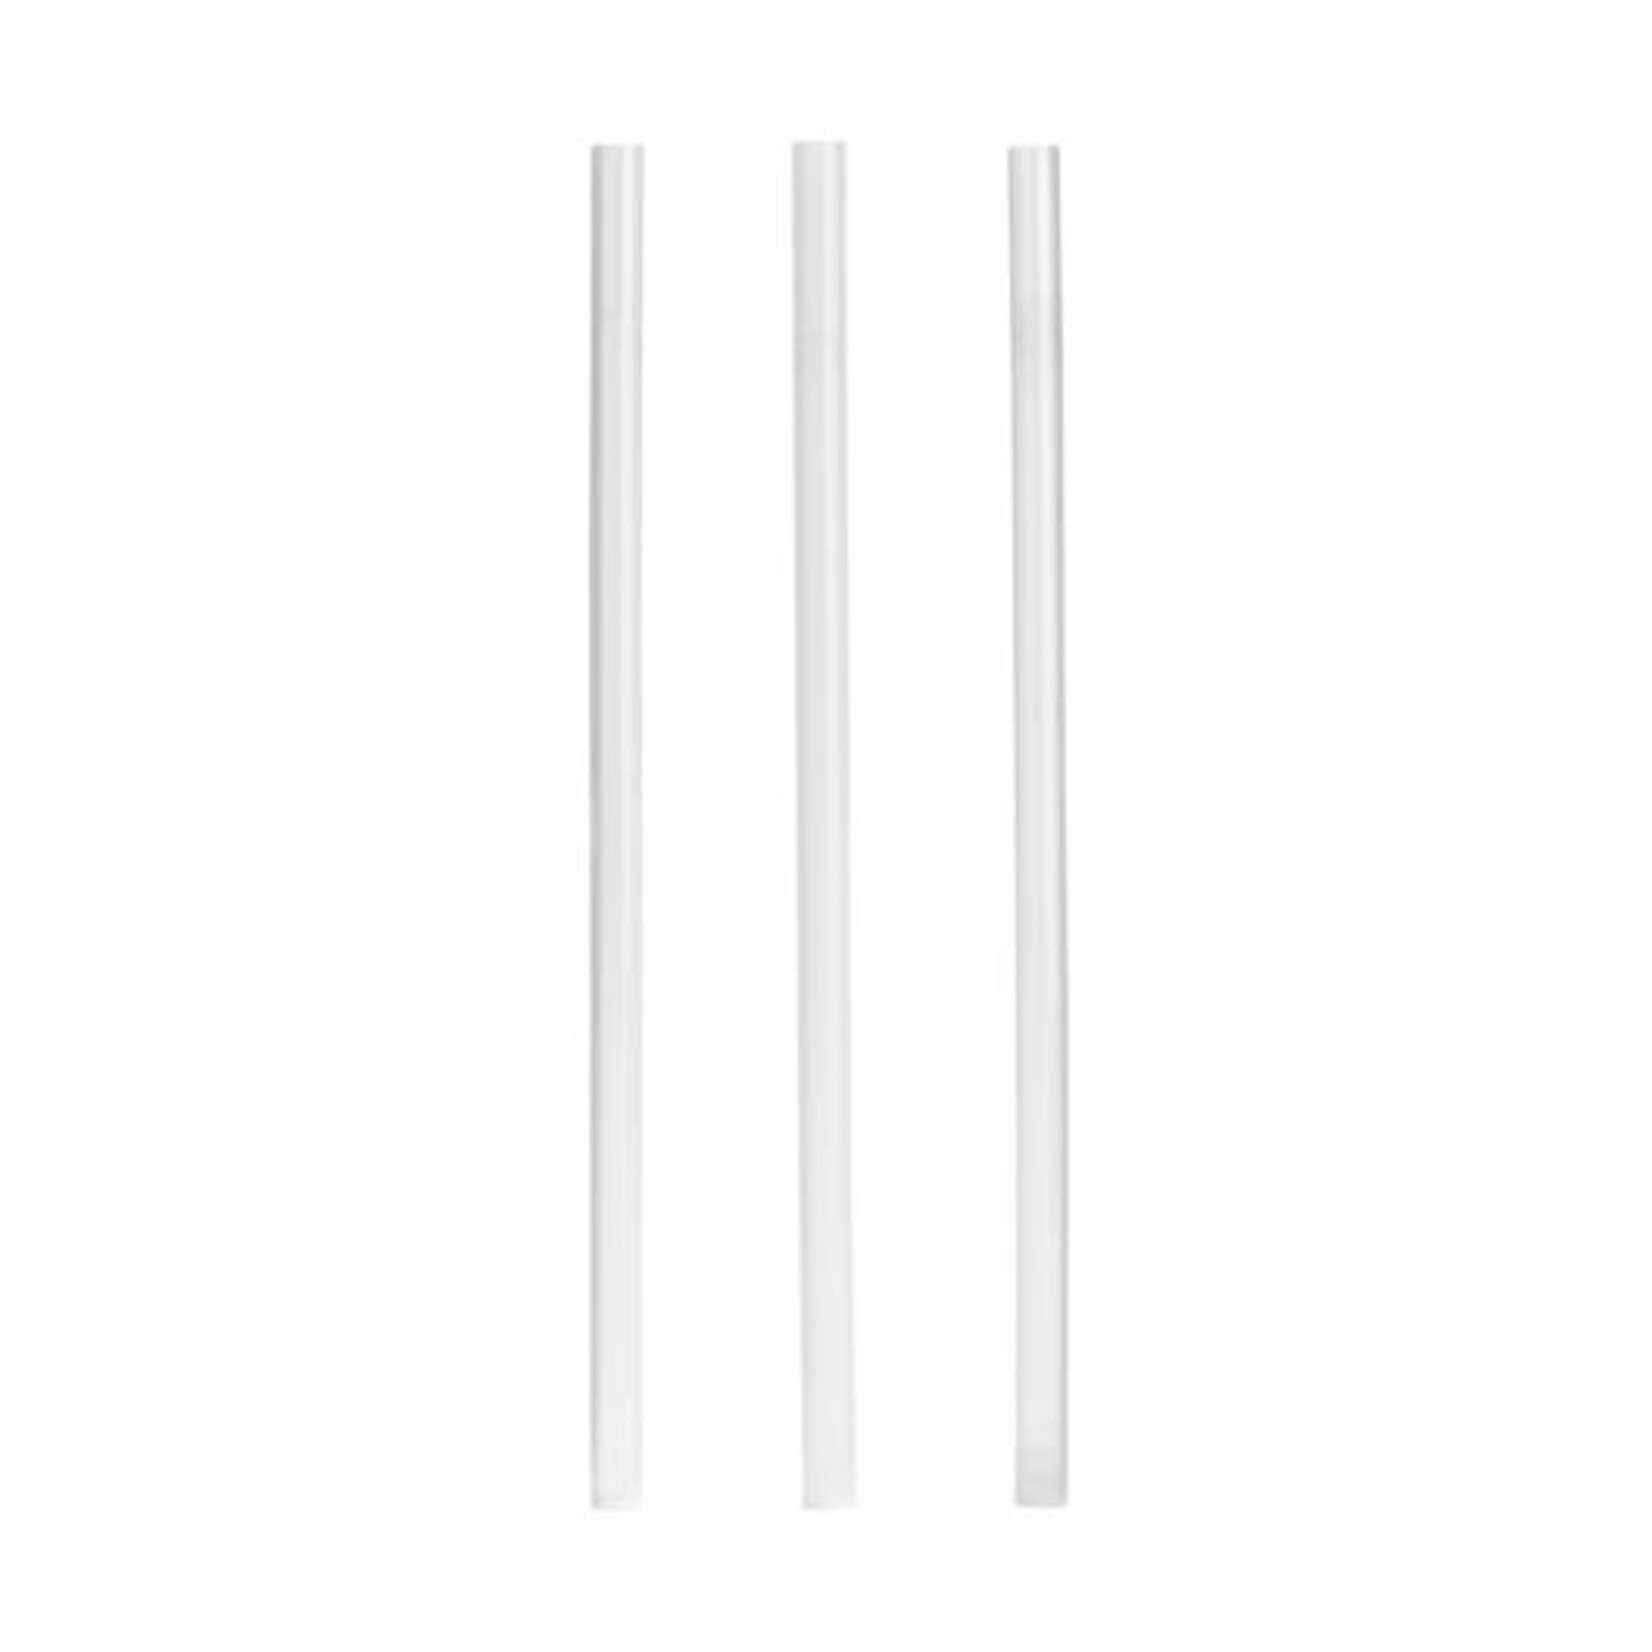 Hydro Flask 3 pack Replacement straws